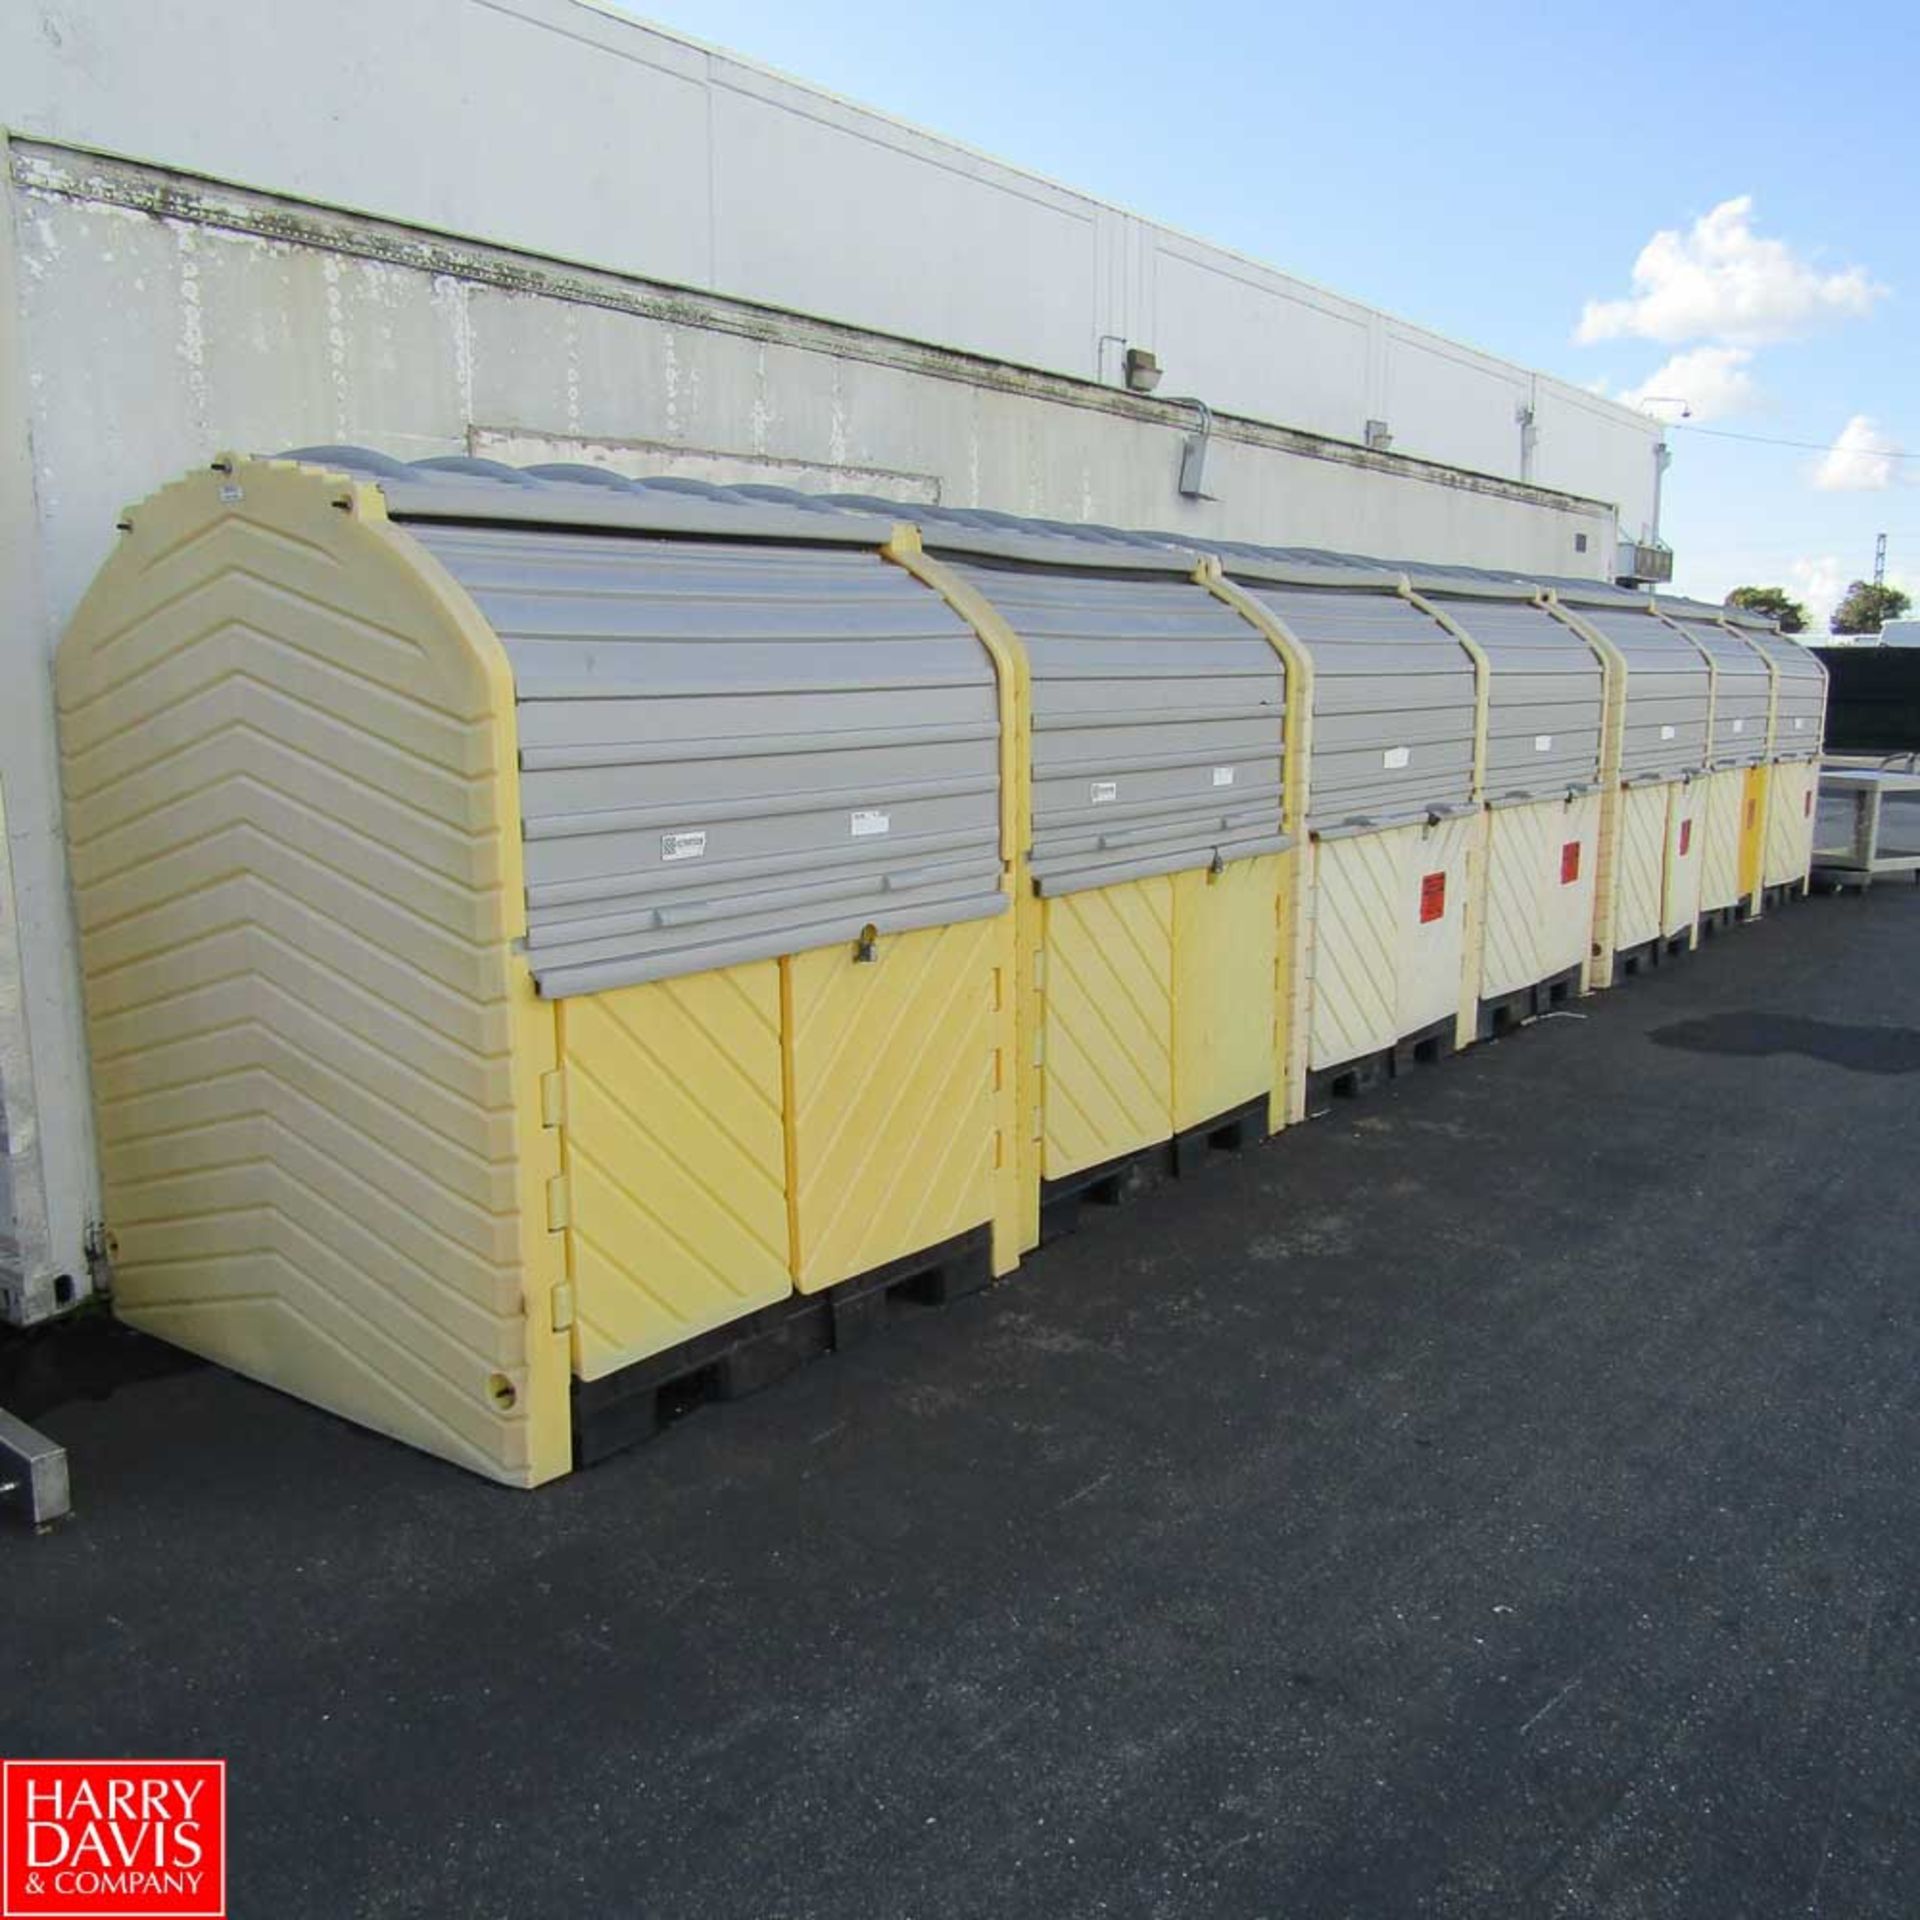 Chemical Storage Container Rigging Fee: 500